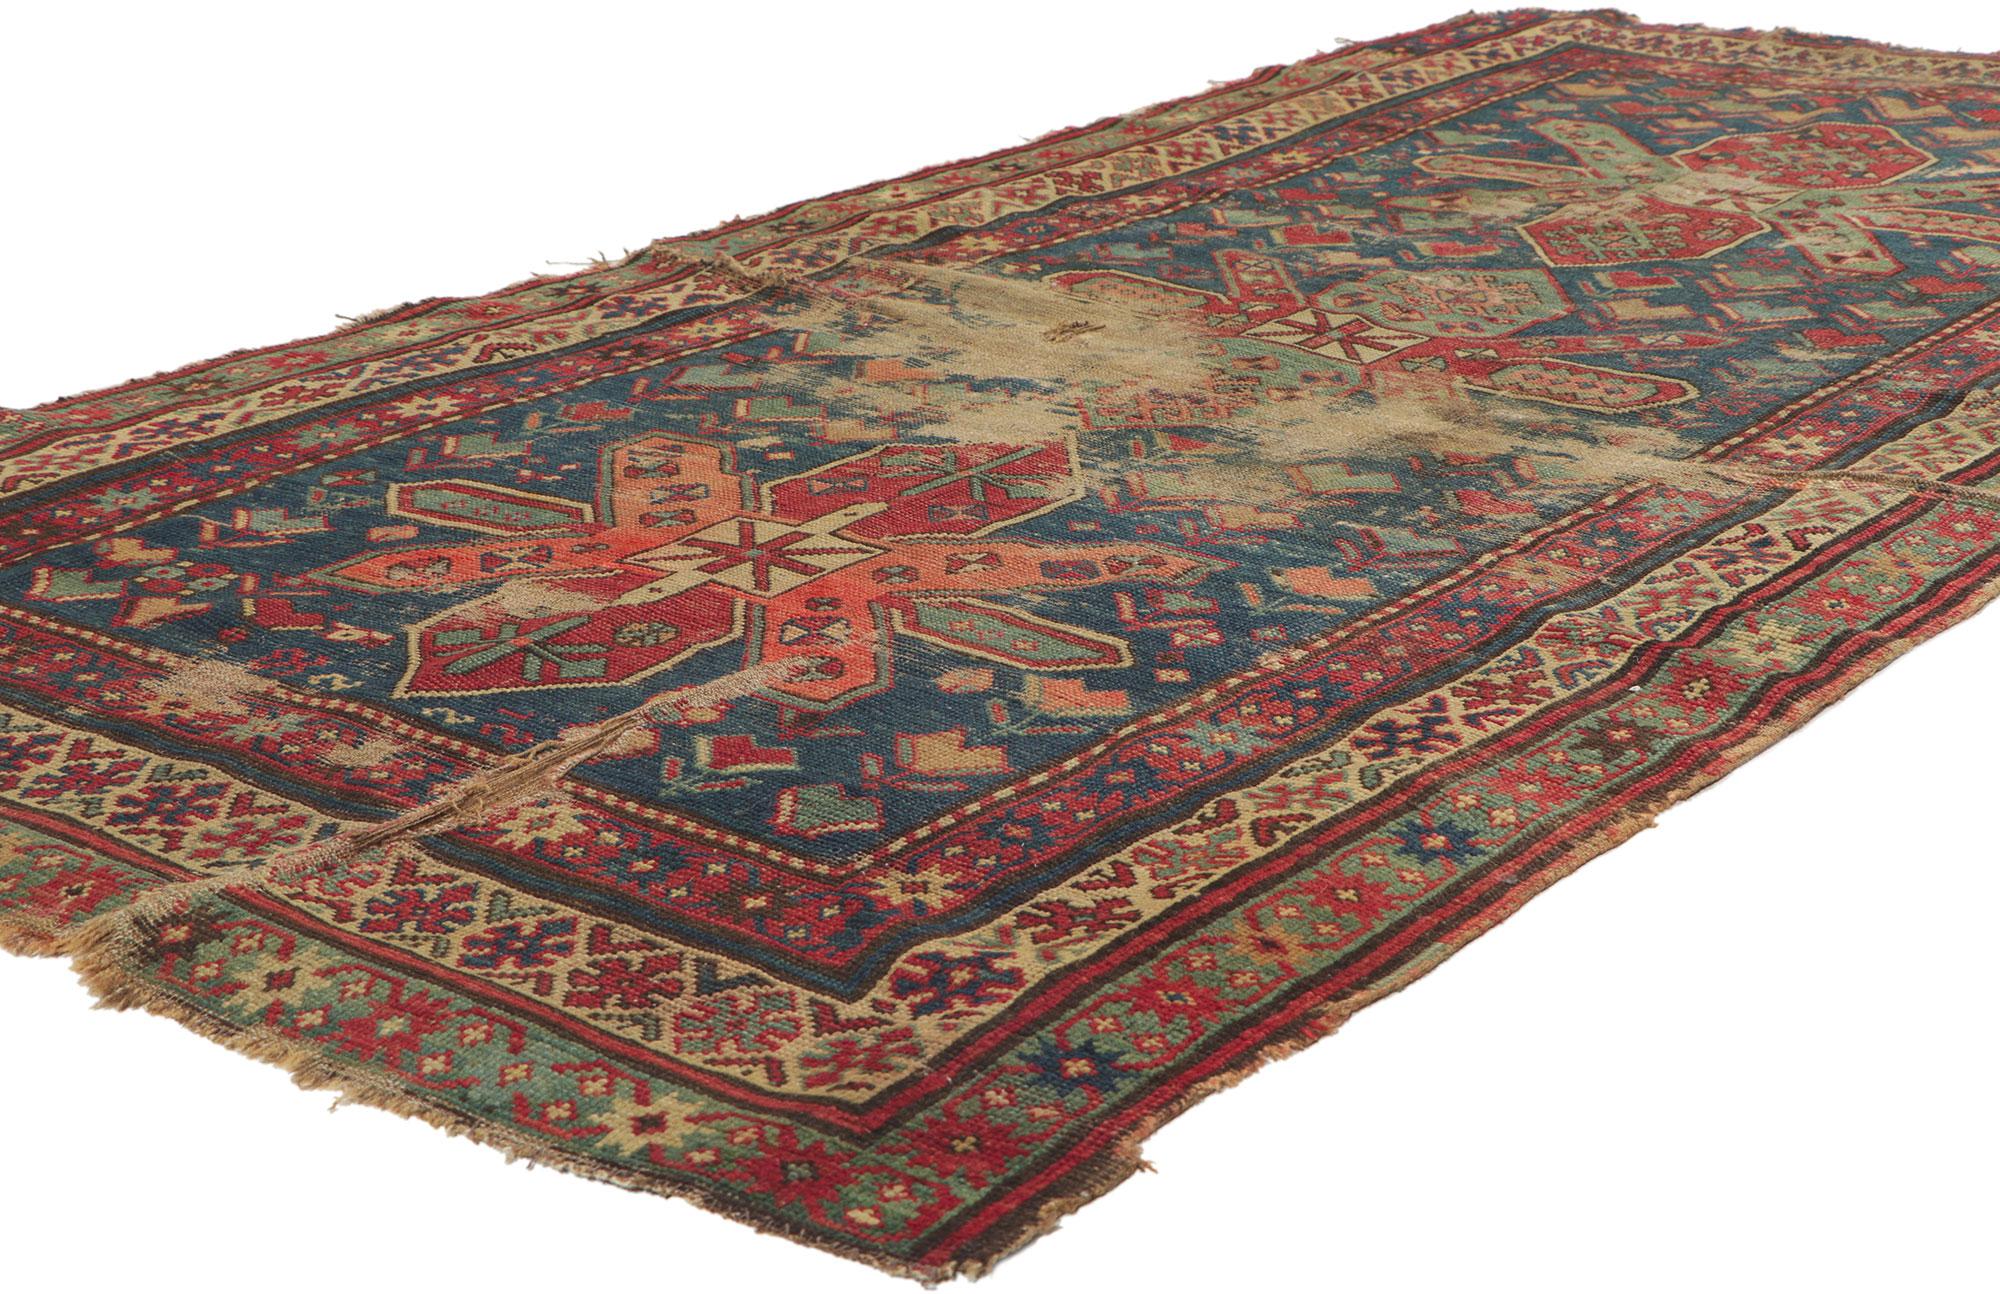 78312 antique caucasian kazak runner, 03'10 x 07'10.
Full of tiny details and nomadic charm, this hand knotted wool distressed antique caucasian kazak rug is a captivating vision of woven beauty. The eye-catching tribal design and earthy colorway